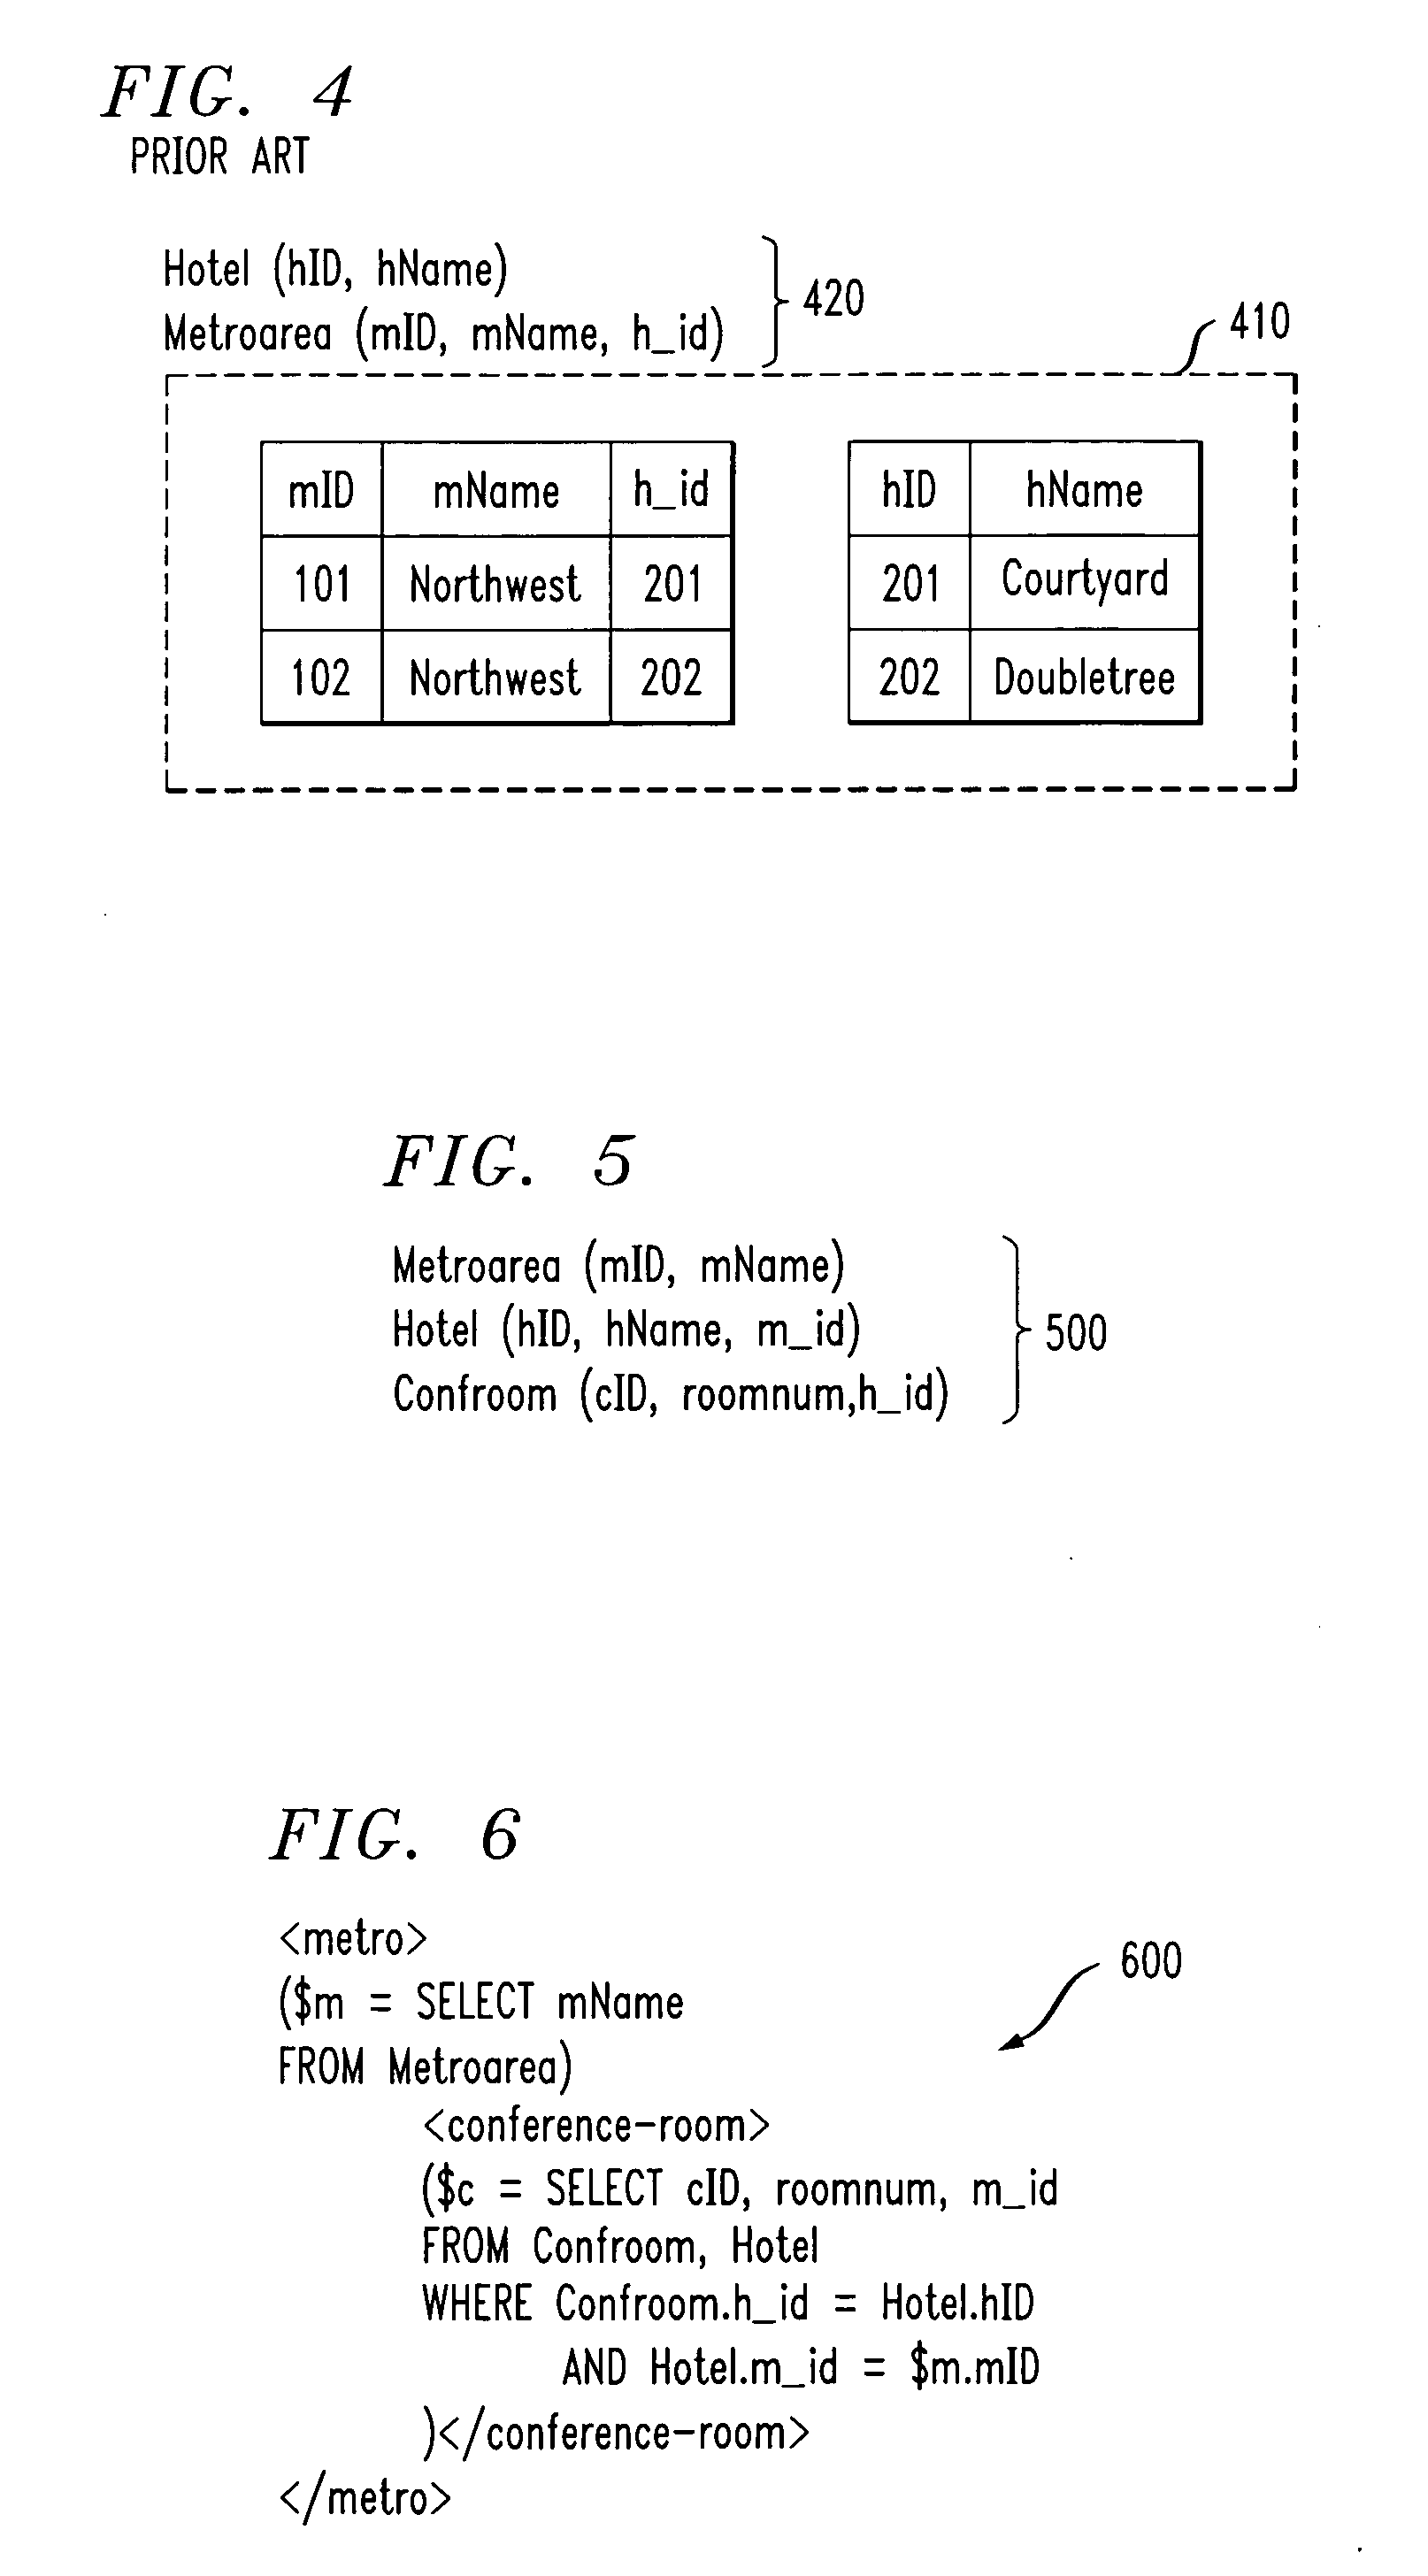 Method and apparatus for updating XML views of relational data